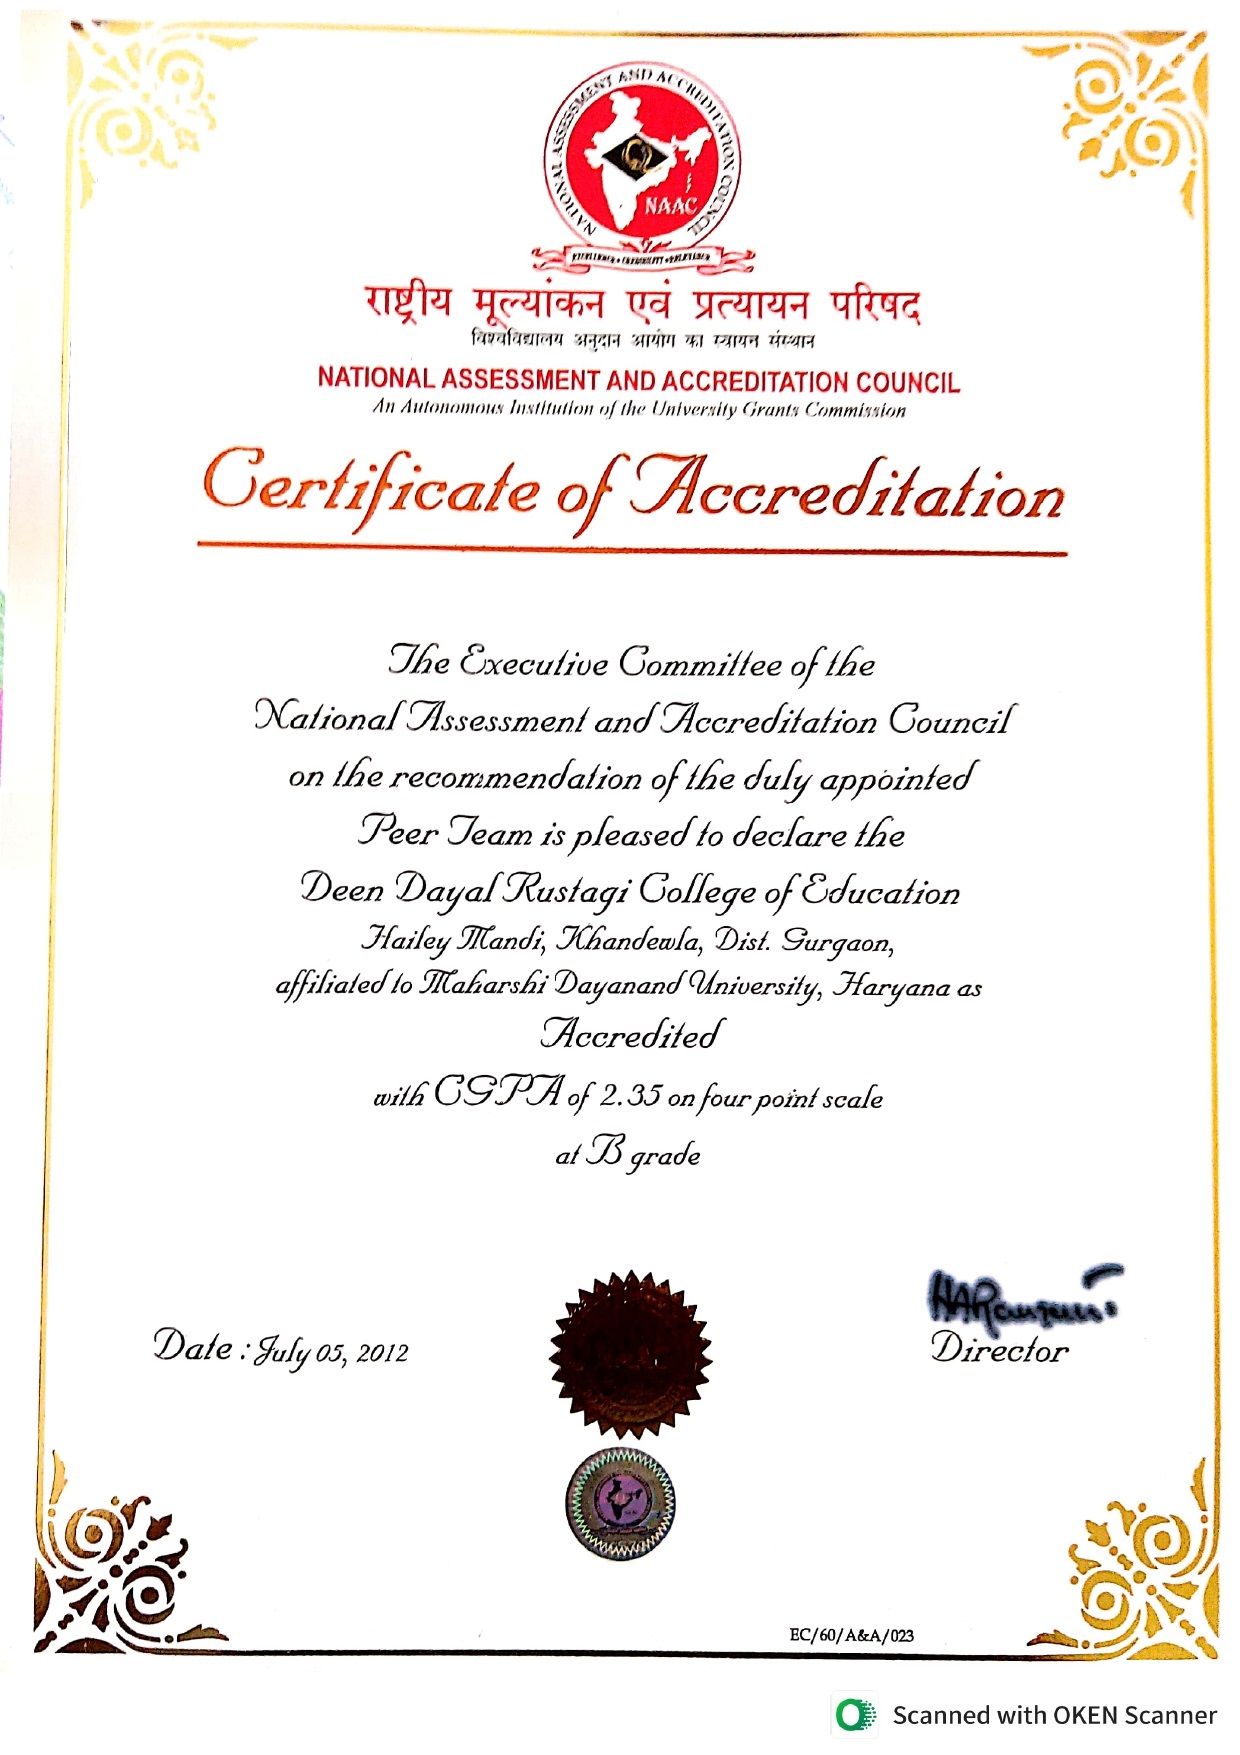 Certificate of Accreditation by NAAC with B+ grade.